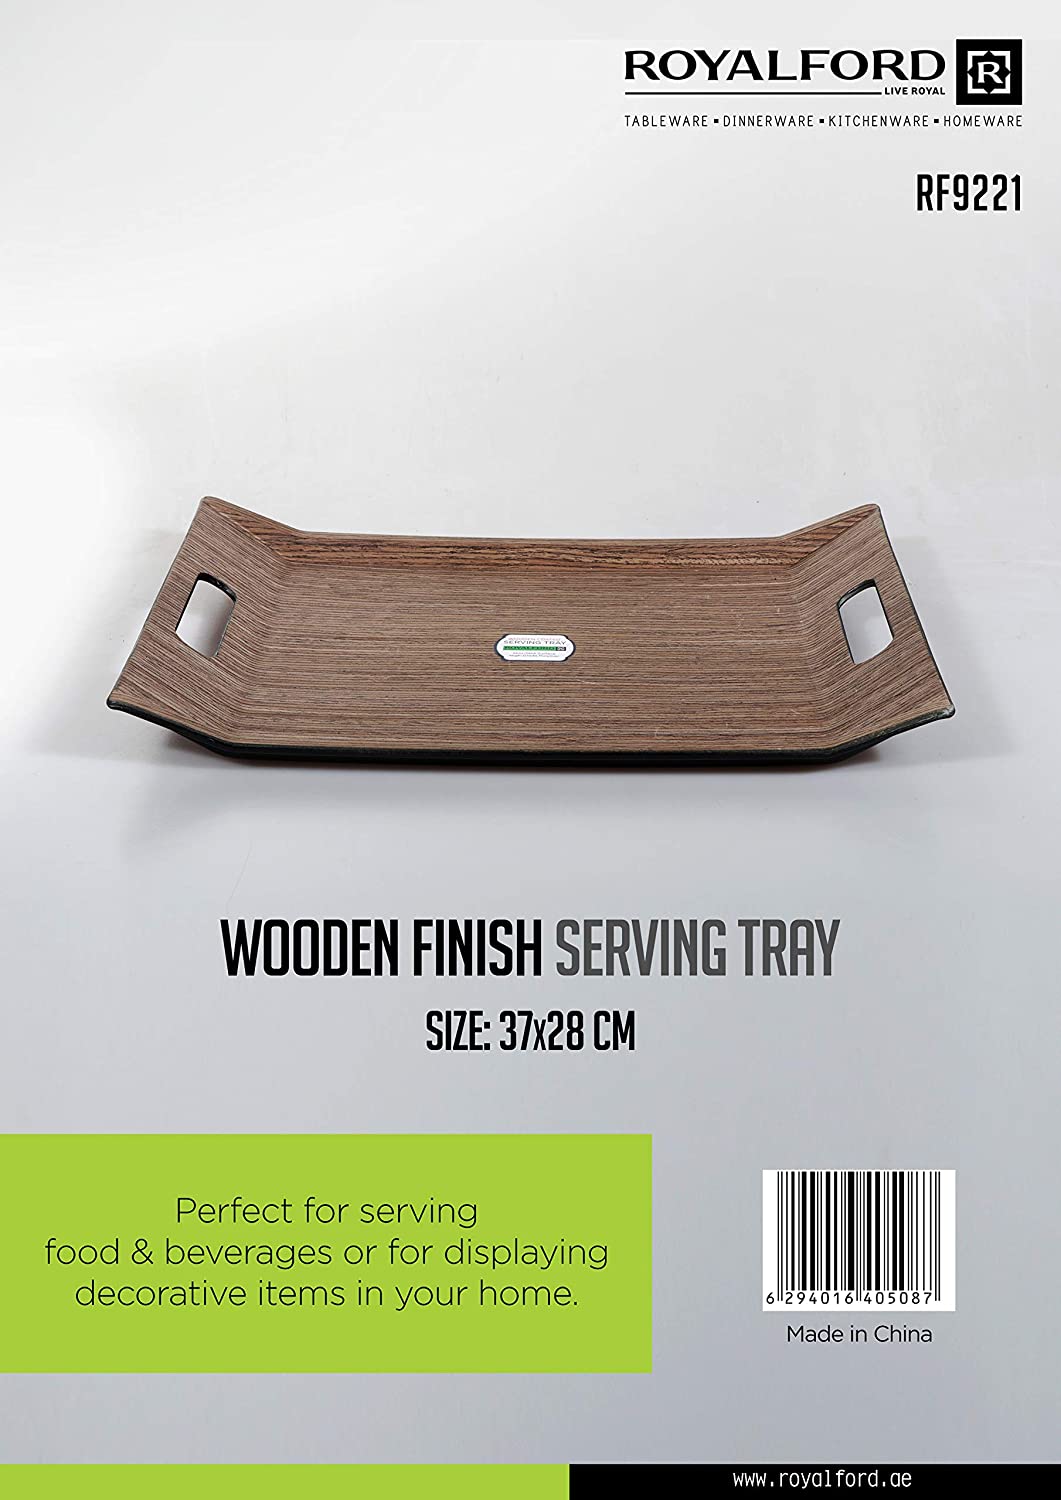 Royalford Wooden Finish Serving Tray 37x28 CM Brown